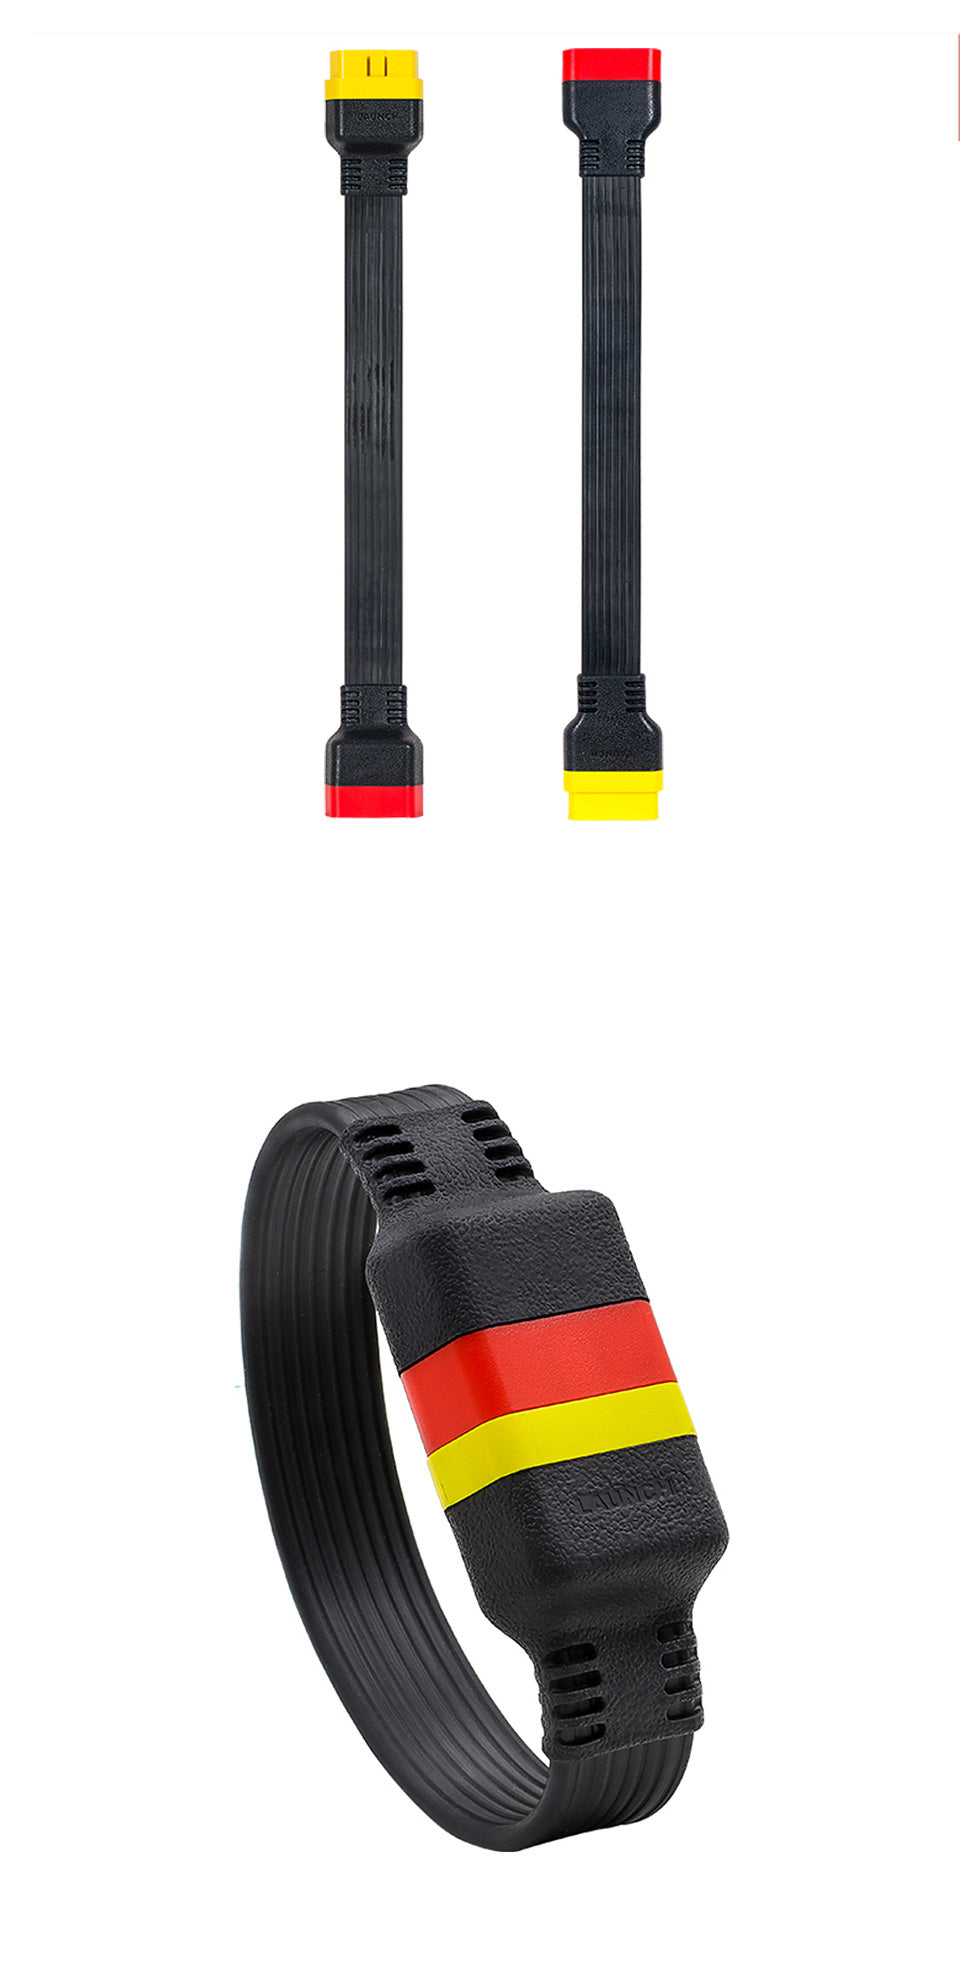 obd2 extension cable for launch x431 idiag